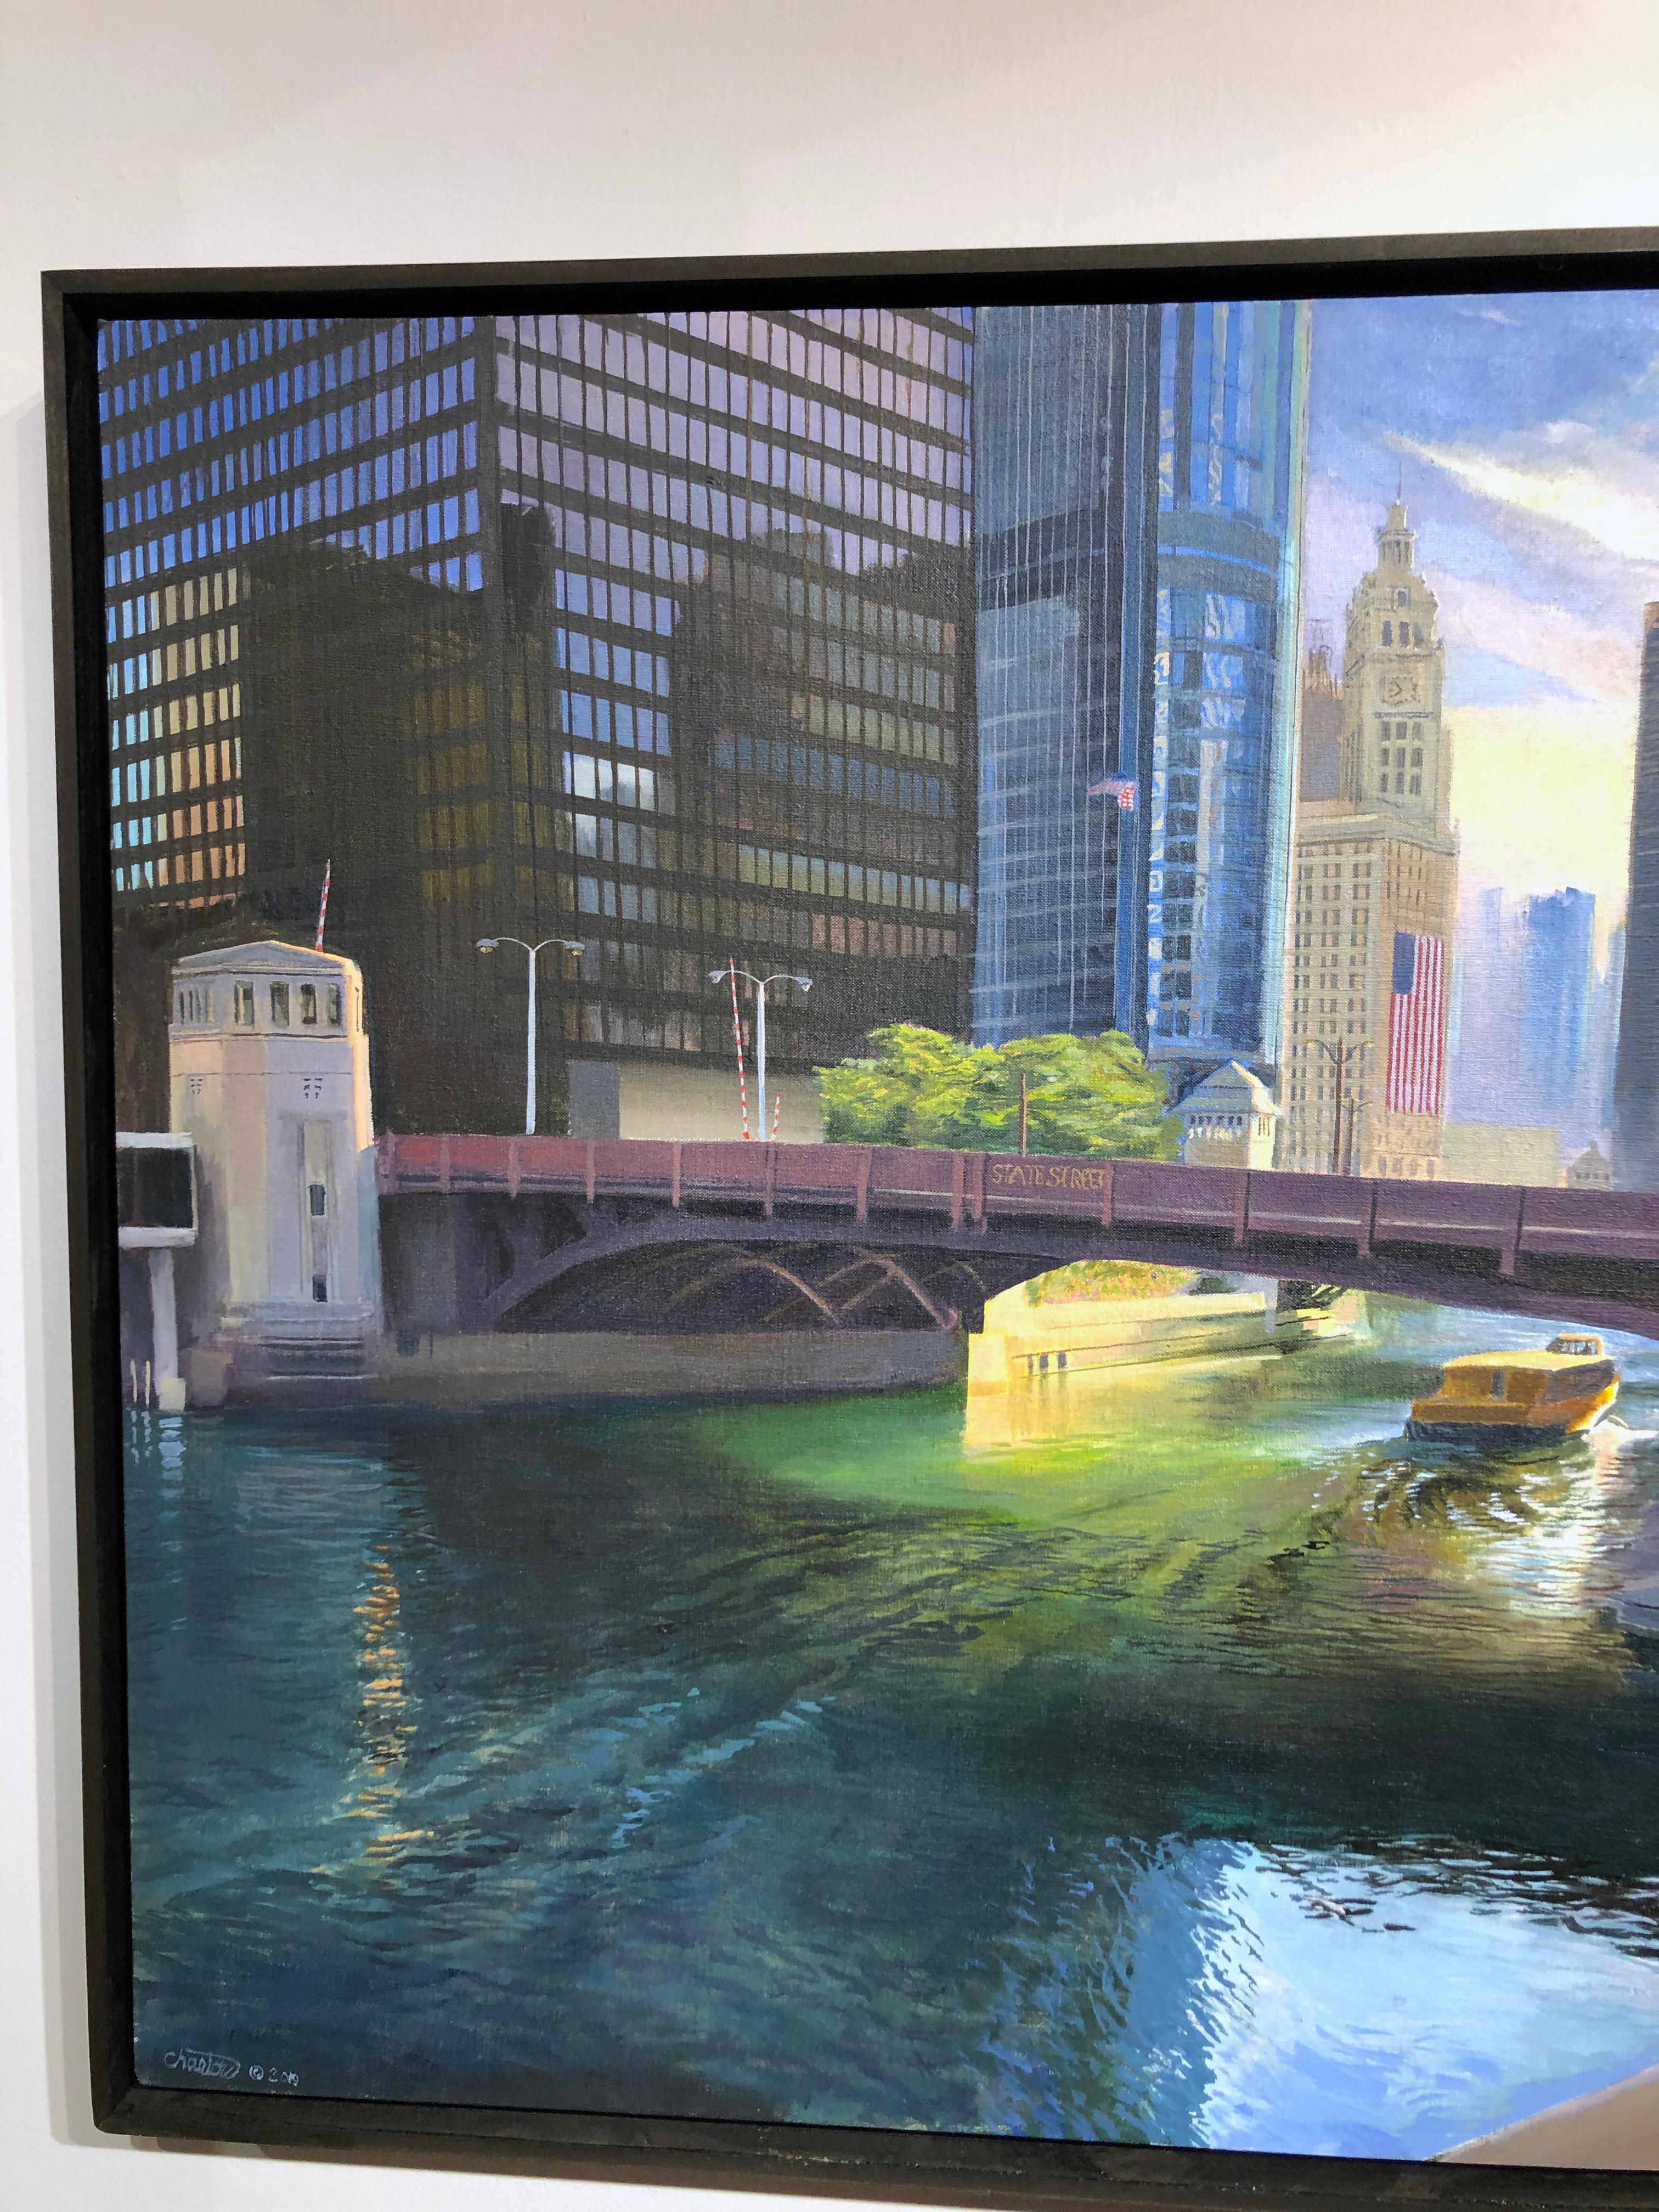 Skyscrapers and the river running through this urban landscape are the focus of Art Chartow's newest work entitled simply 